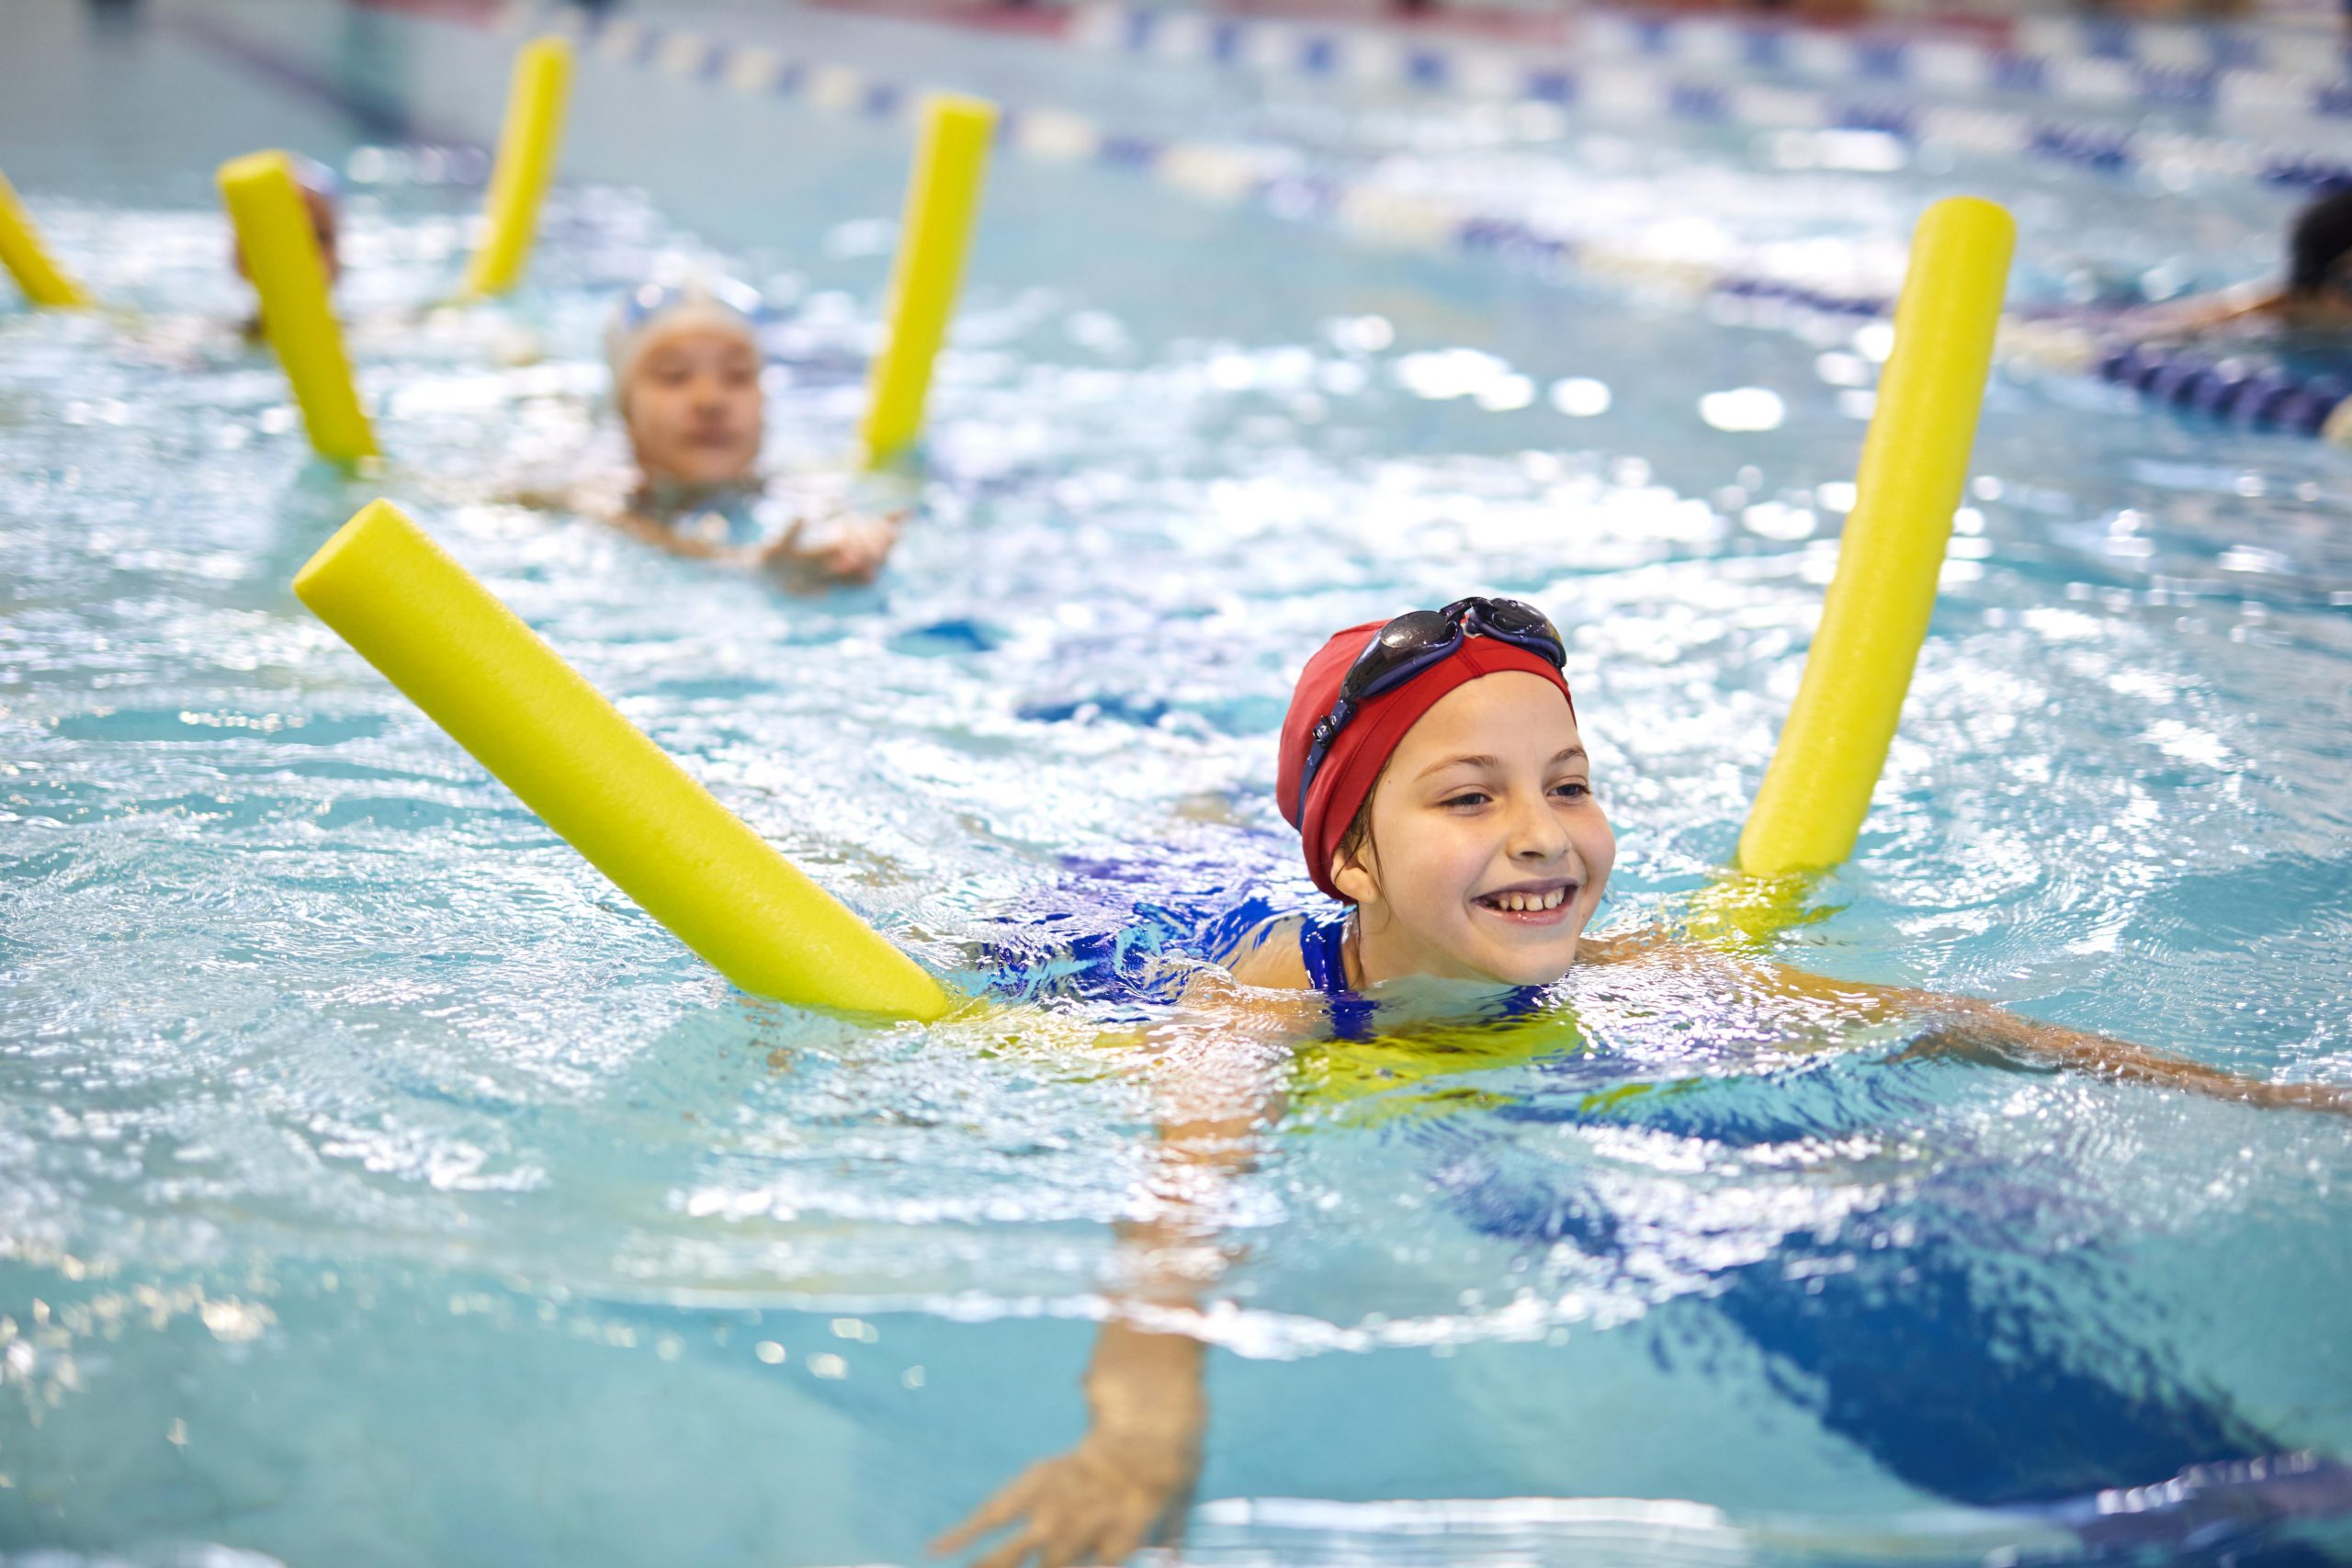 NEWS | Free swimming lessons and family fun swim sessions during the school summer holidays